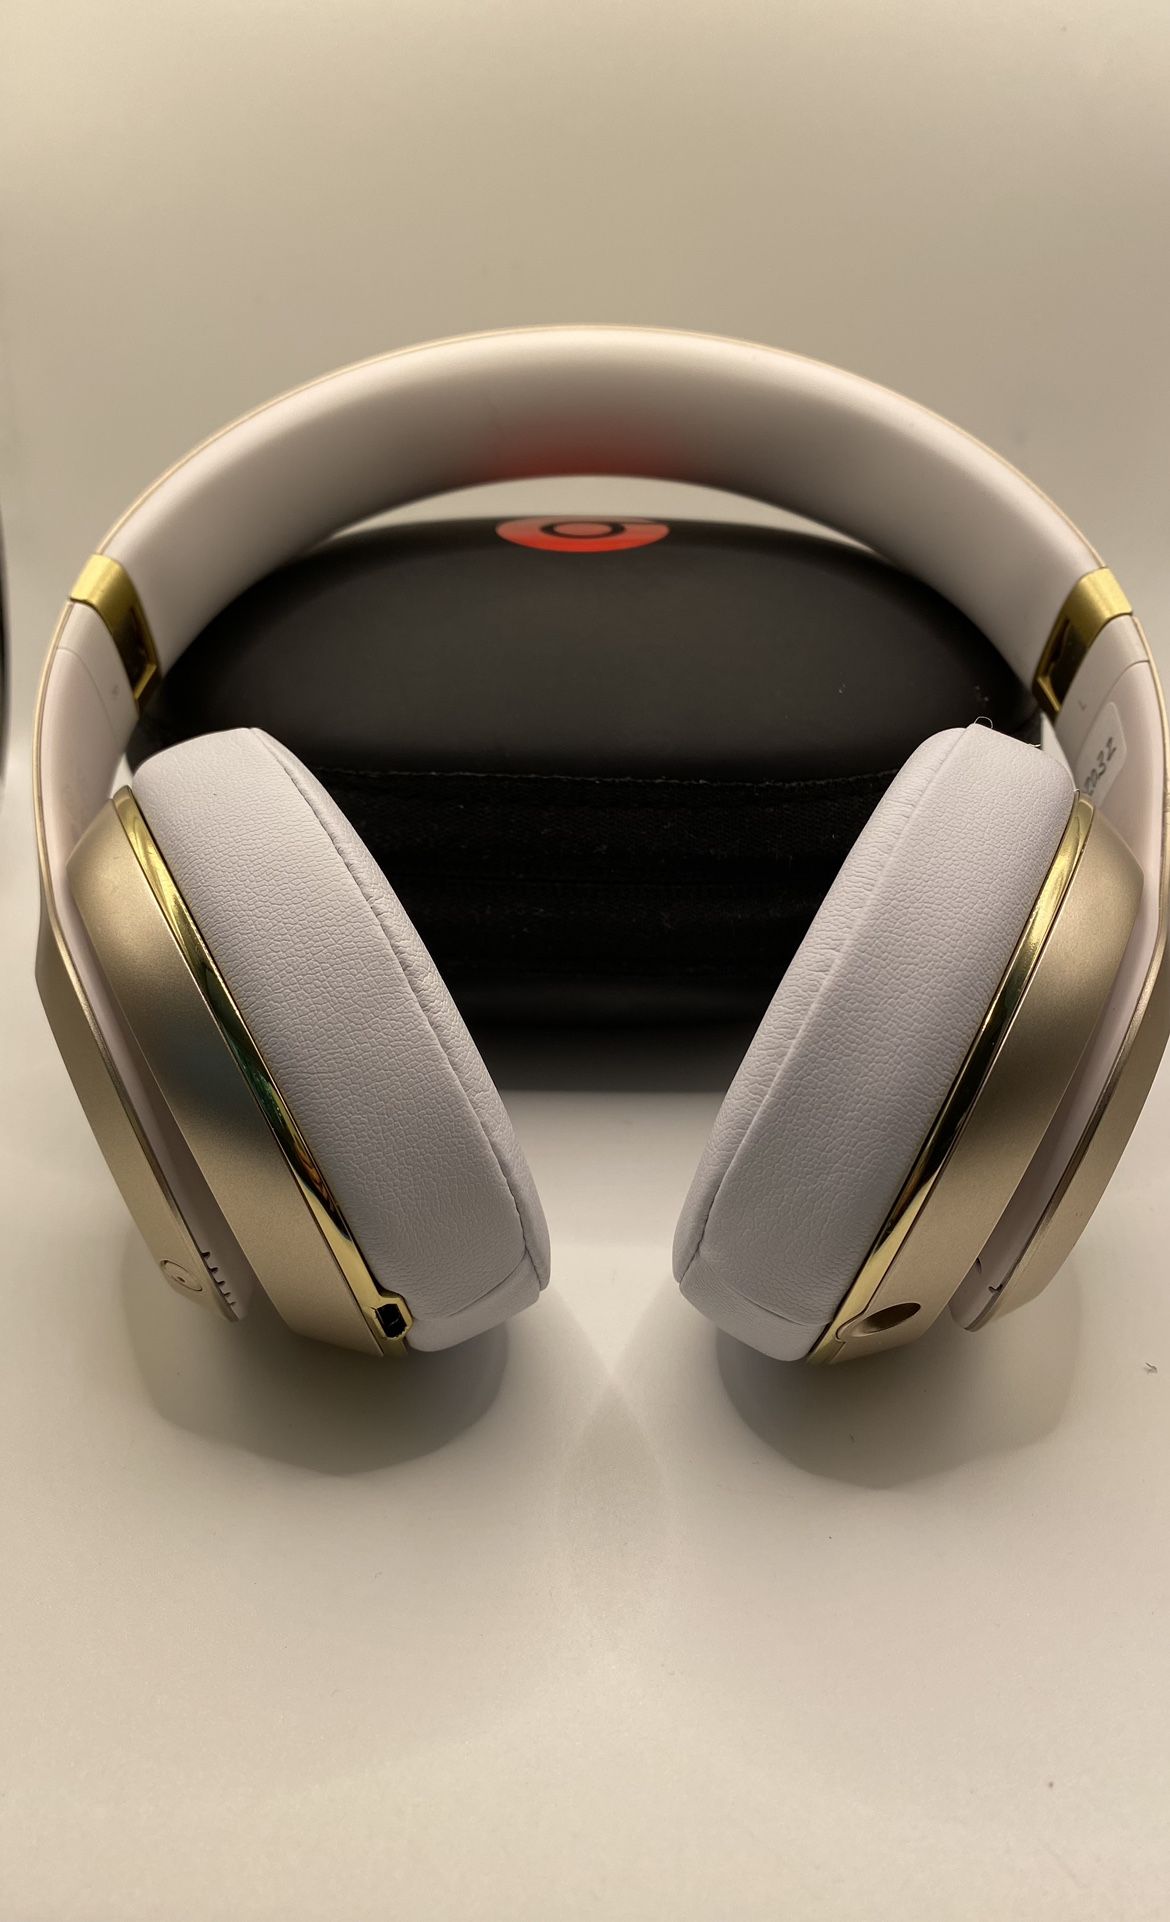 (Authentic) Gold Beats Studio Bluetooth Wireless Headphones with noise Canceling 2039